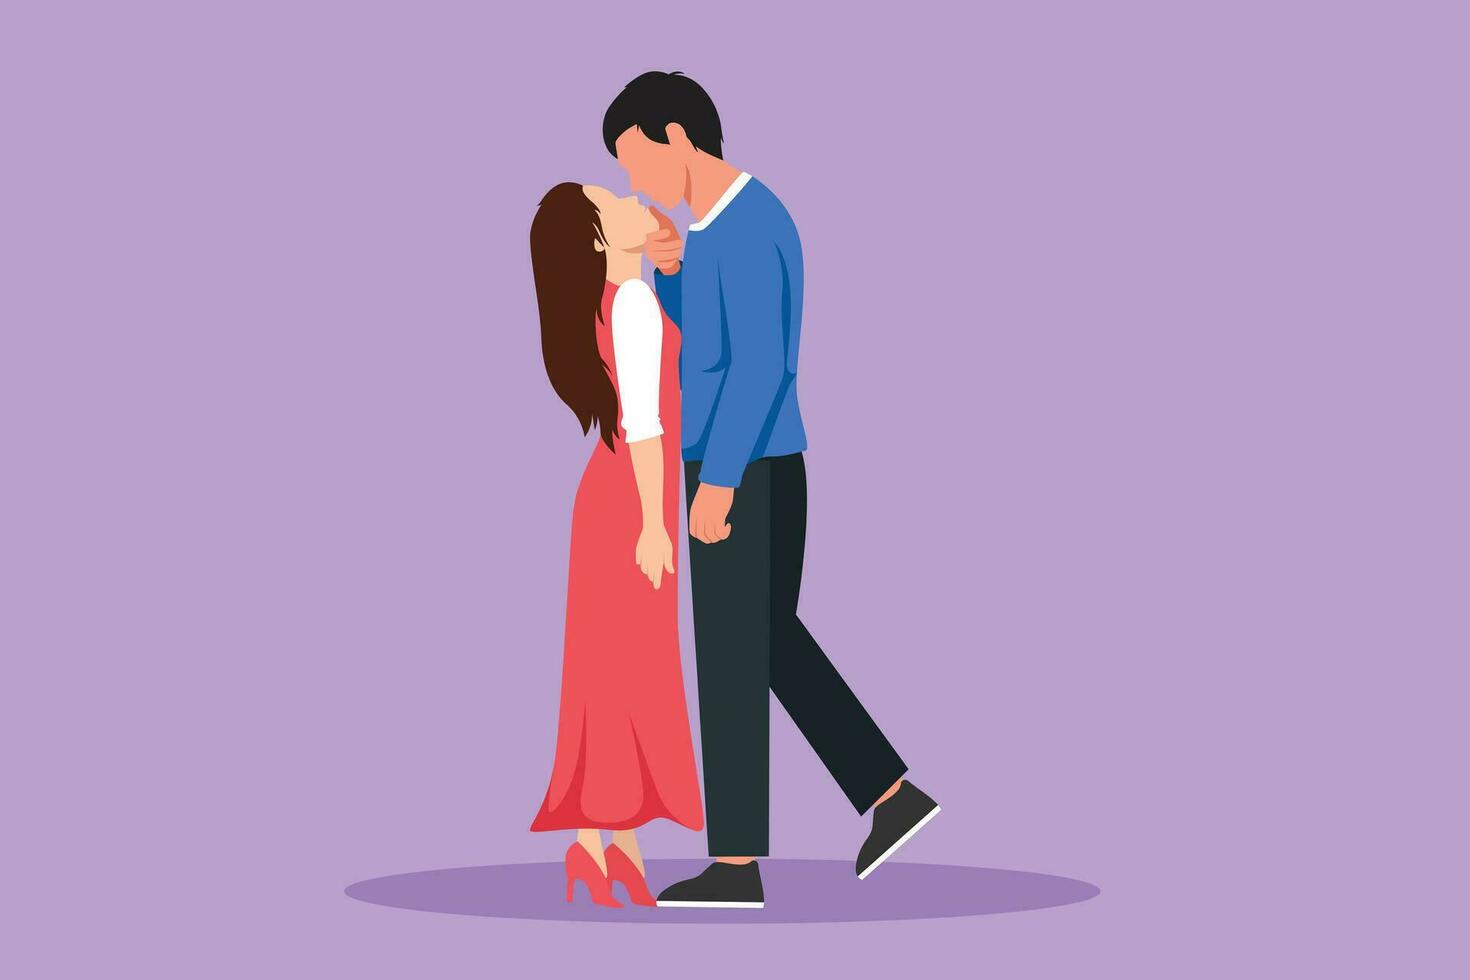 Cartoon flat style drawing dominant relationship. Romantic couple in love kissing and hugging. Happy handsome man and pretty woman celebrating wedding anniversary. Graphic design vector illustration